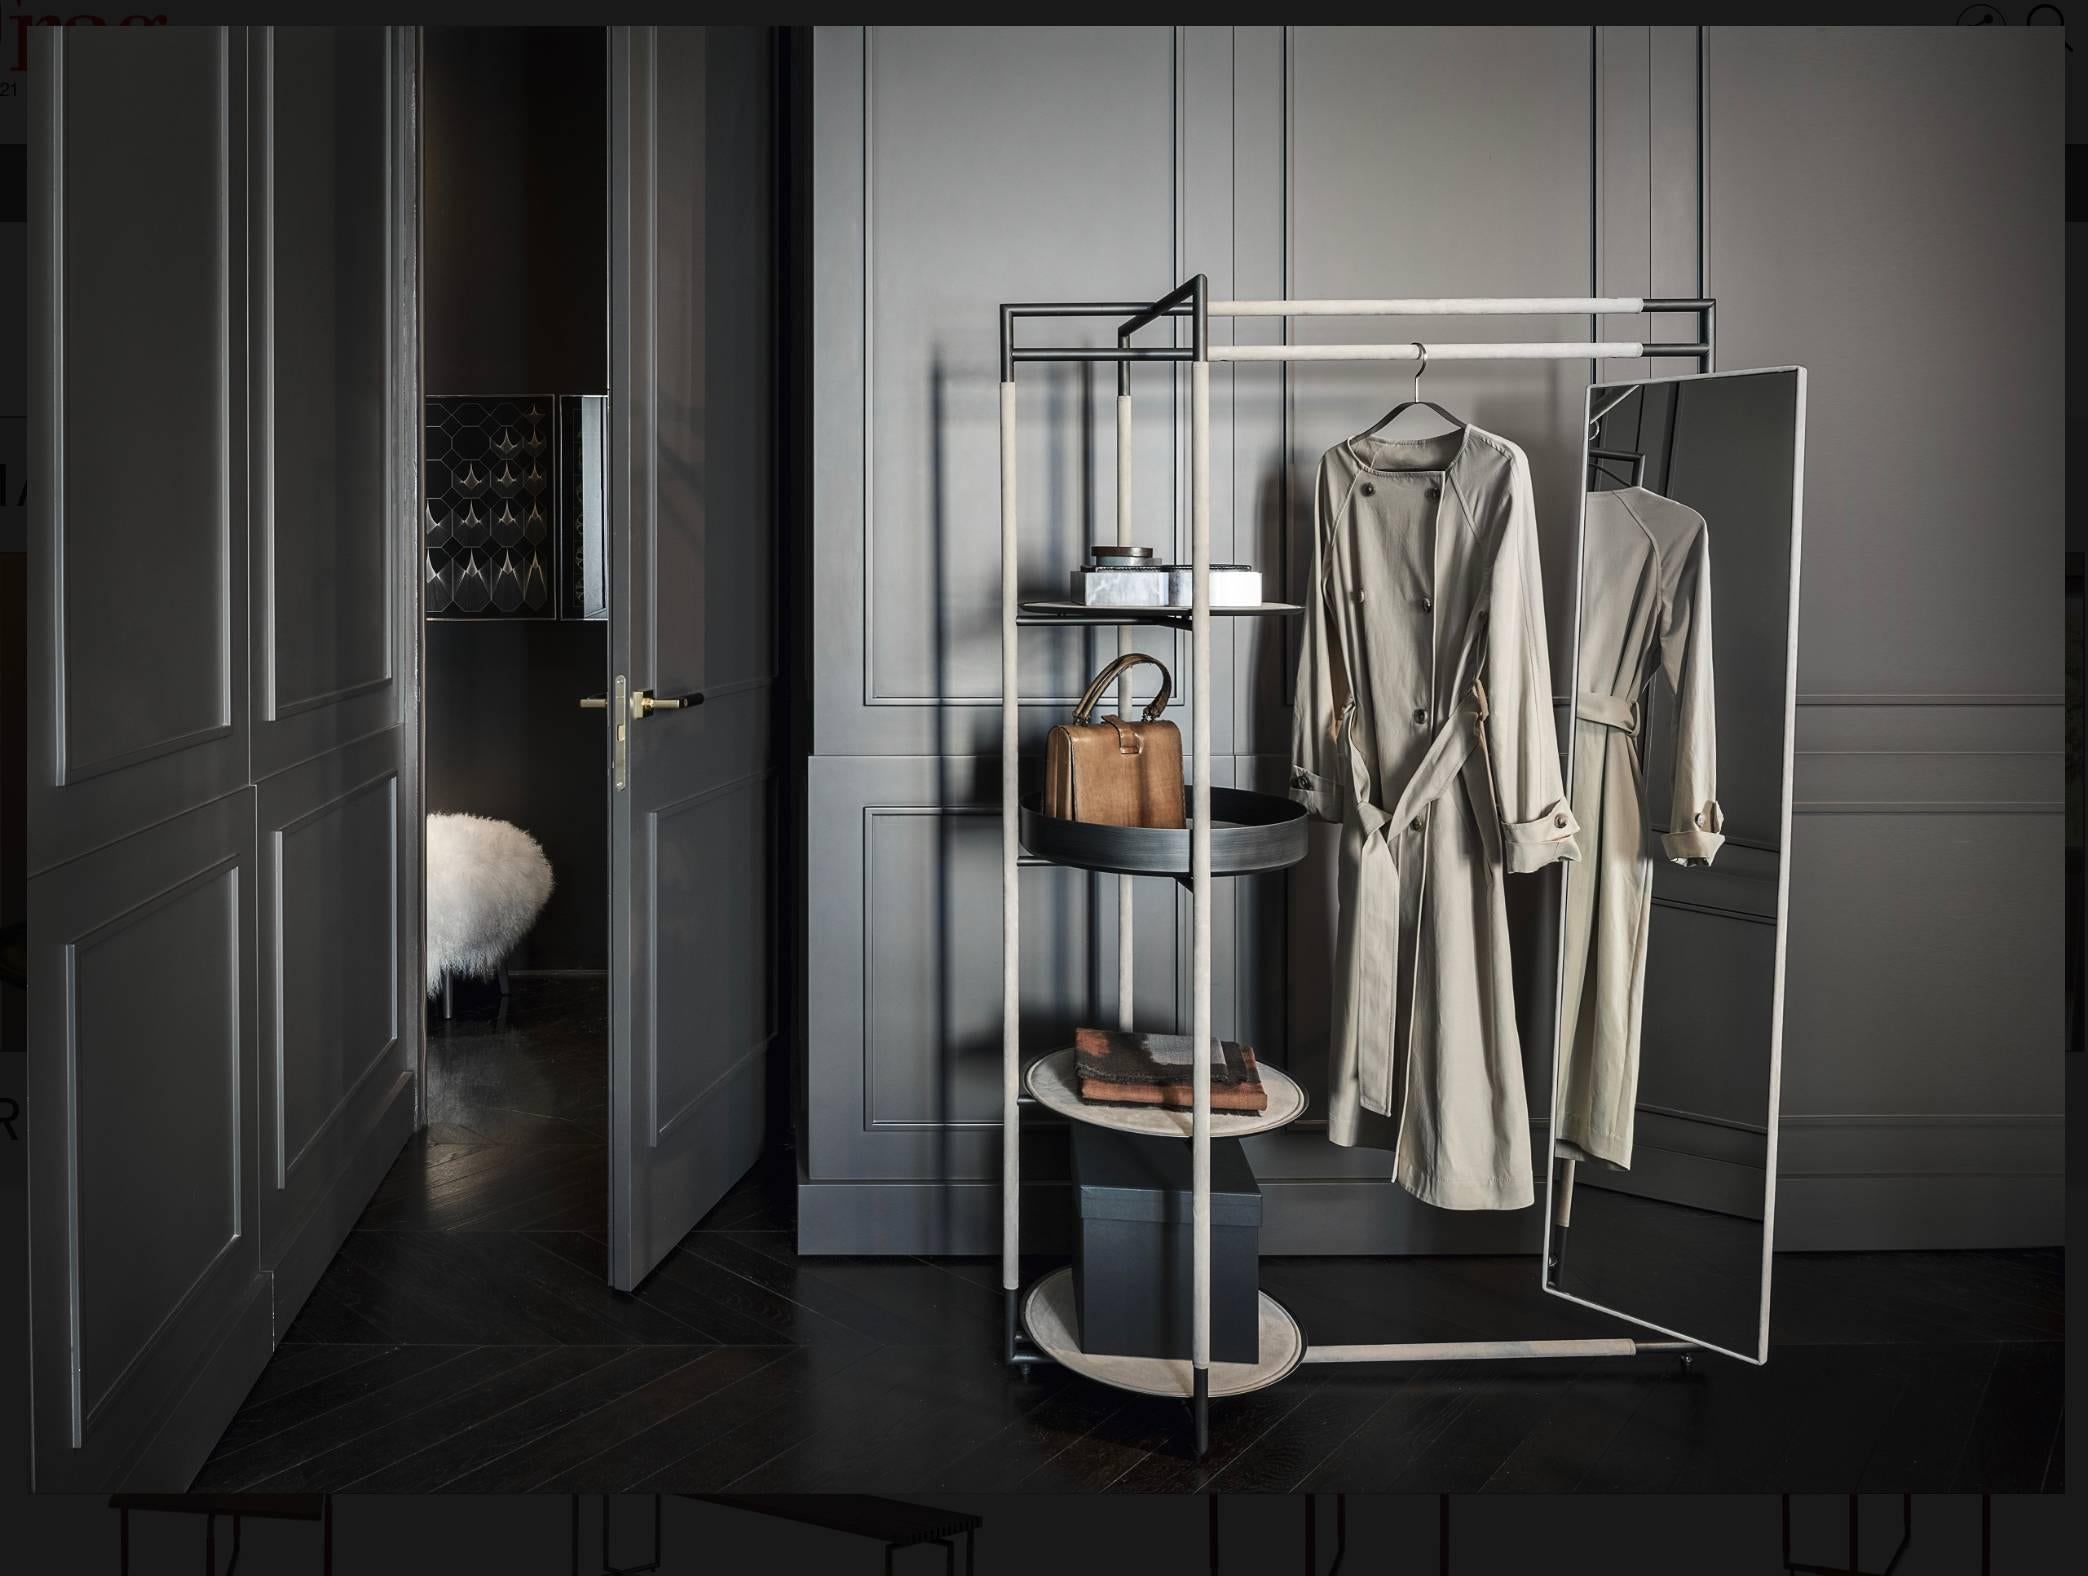 Bak Valet stand mirror
by Ferruccio Laviani

Valet stand with a brushed black steel frame upholstered with leather and slightly padded leather-upholstered steel shelves.

Measure: H 165 x W 102 x D 49.